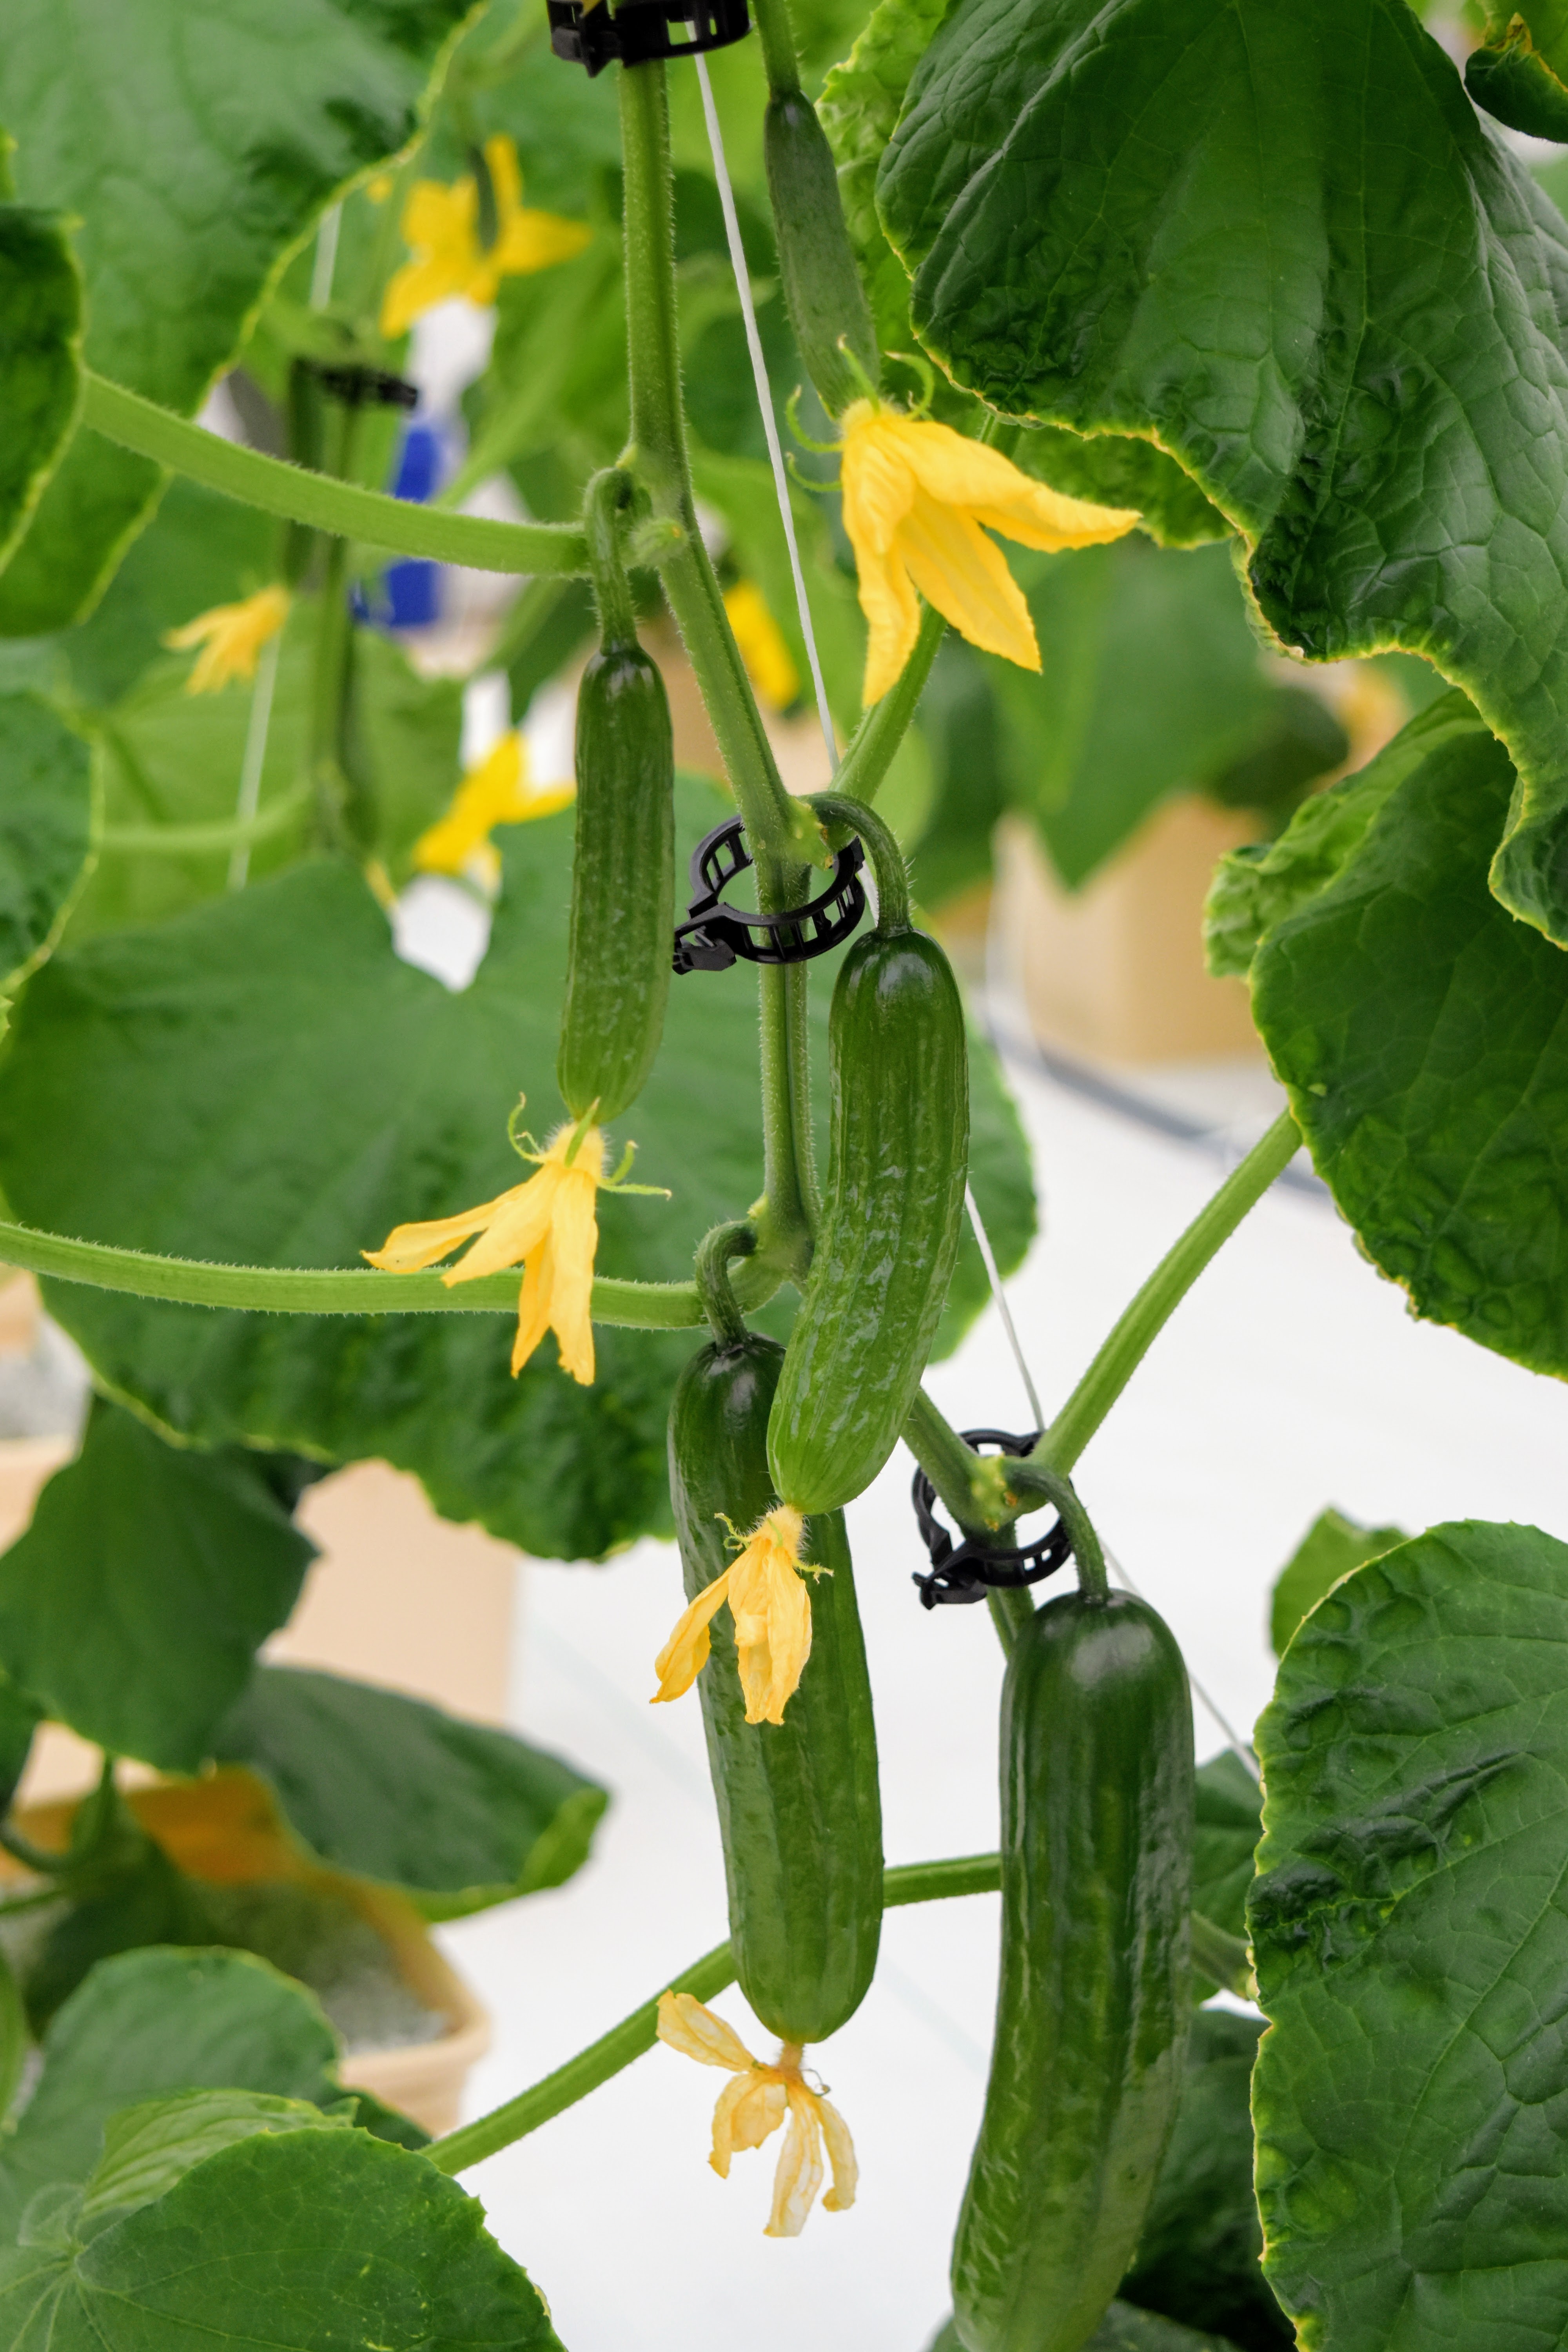 Cucumbers grow as part of Paul Cockson's study on cucumber varieties for greenhouse production. Photo by Garrett Owen